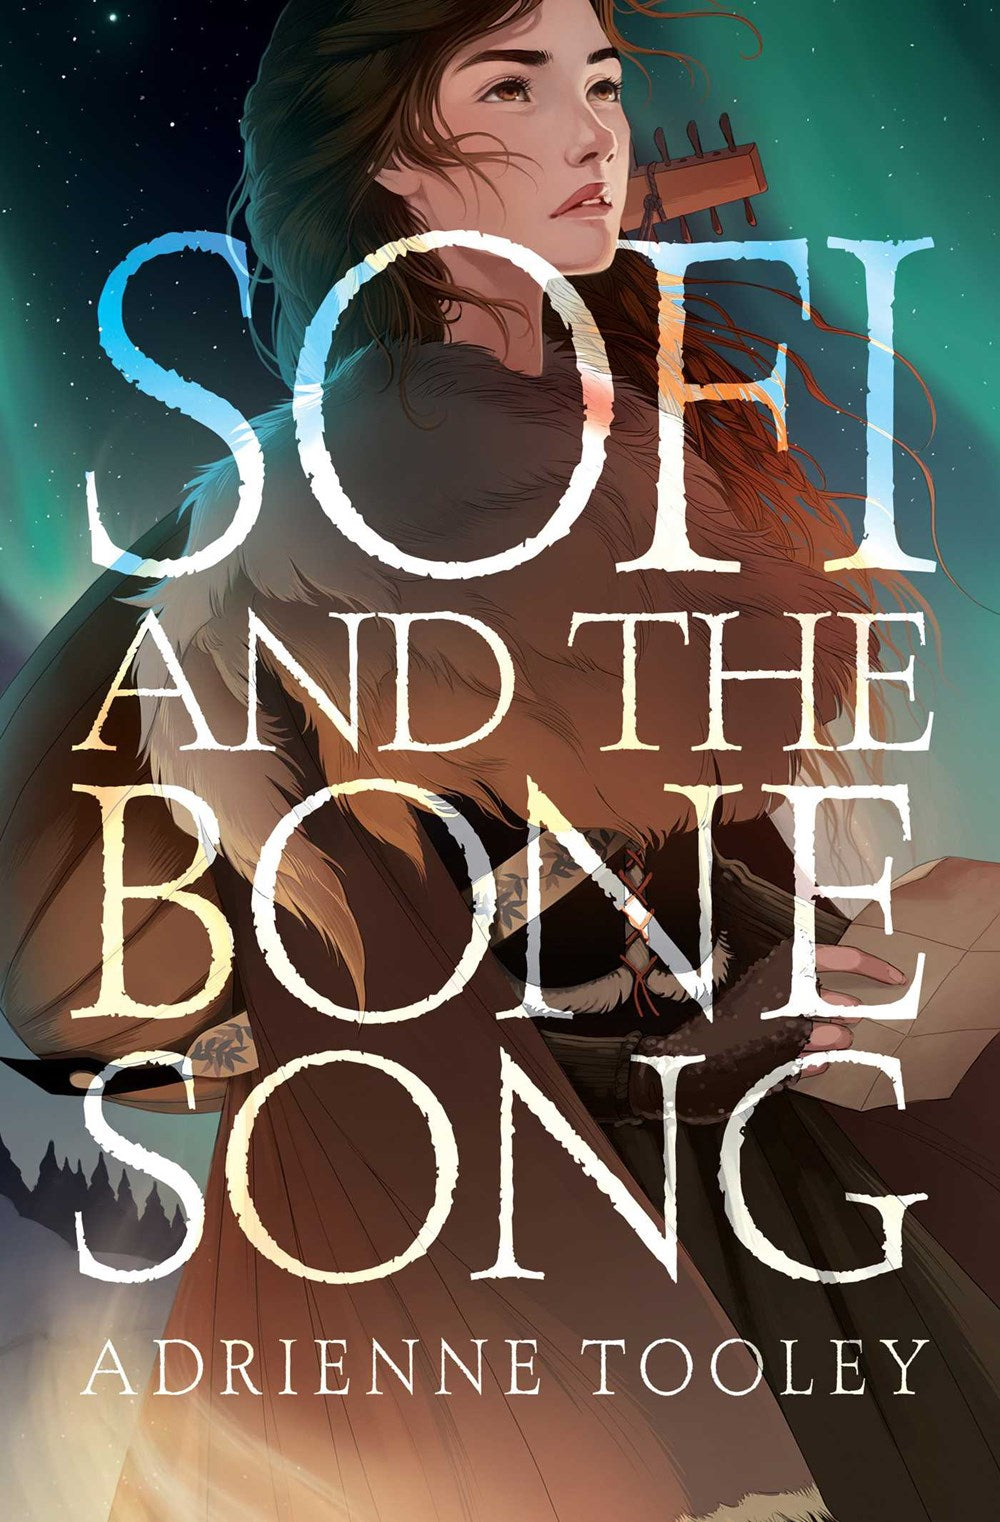 Sofi and the Bone Song - Adrienne Tooley